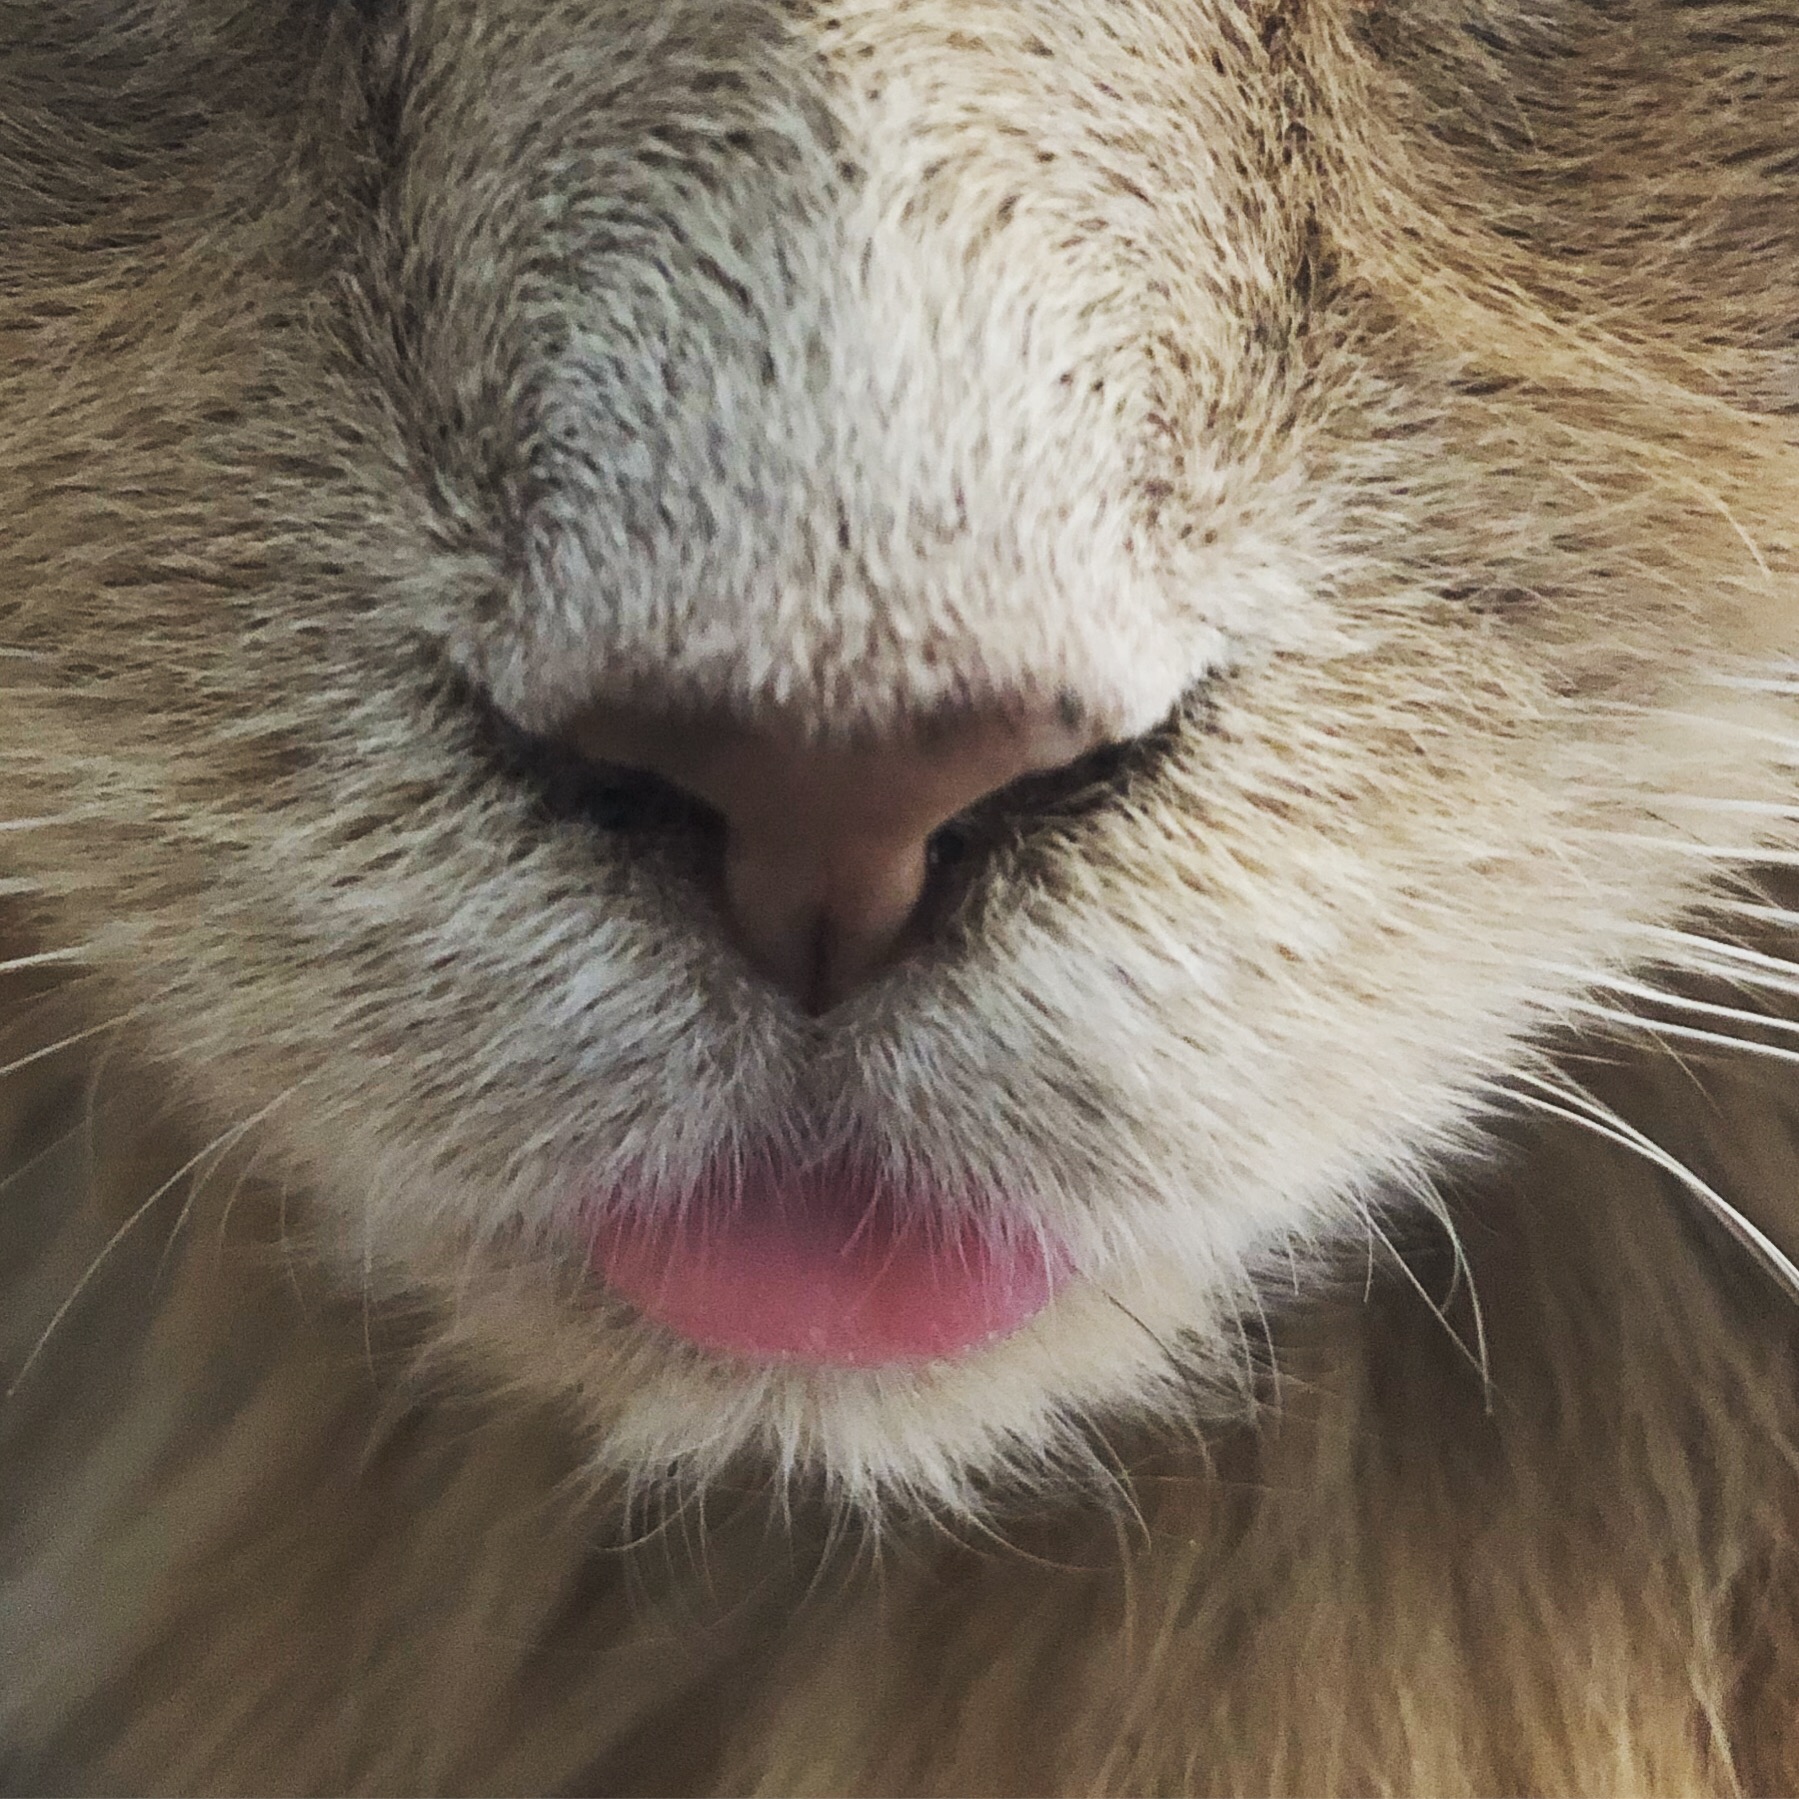 Close up of Joey the cat's face.